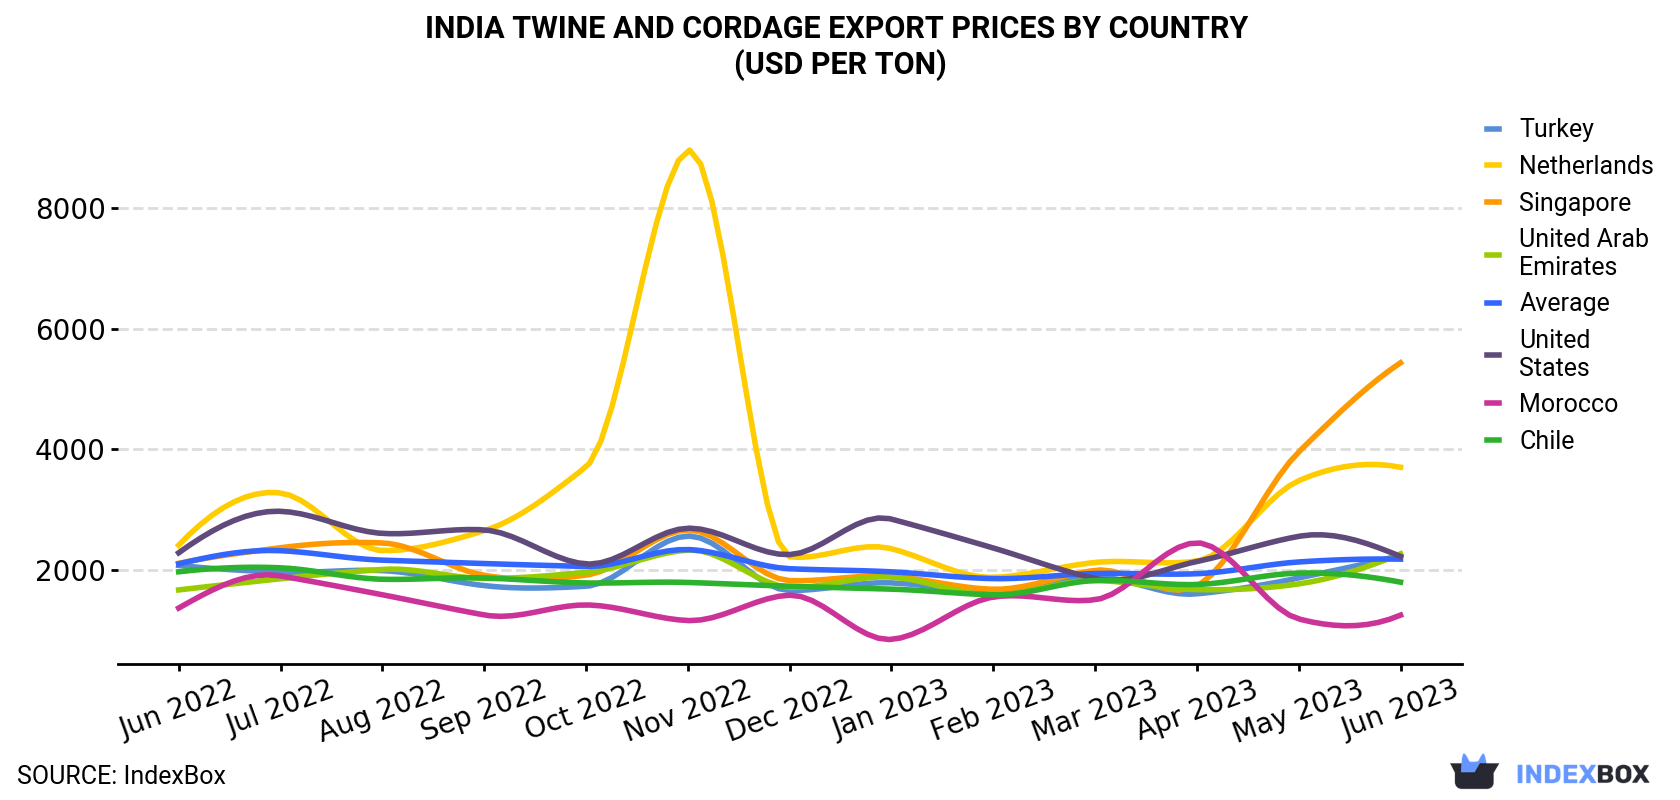 India Twine And Cordage Export Prices By Country (USD Per Ton)